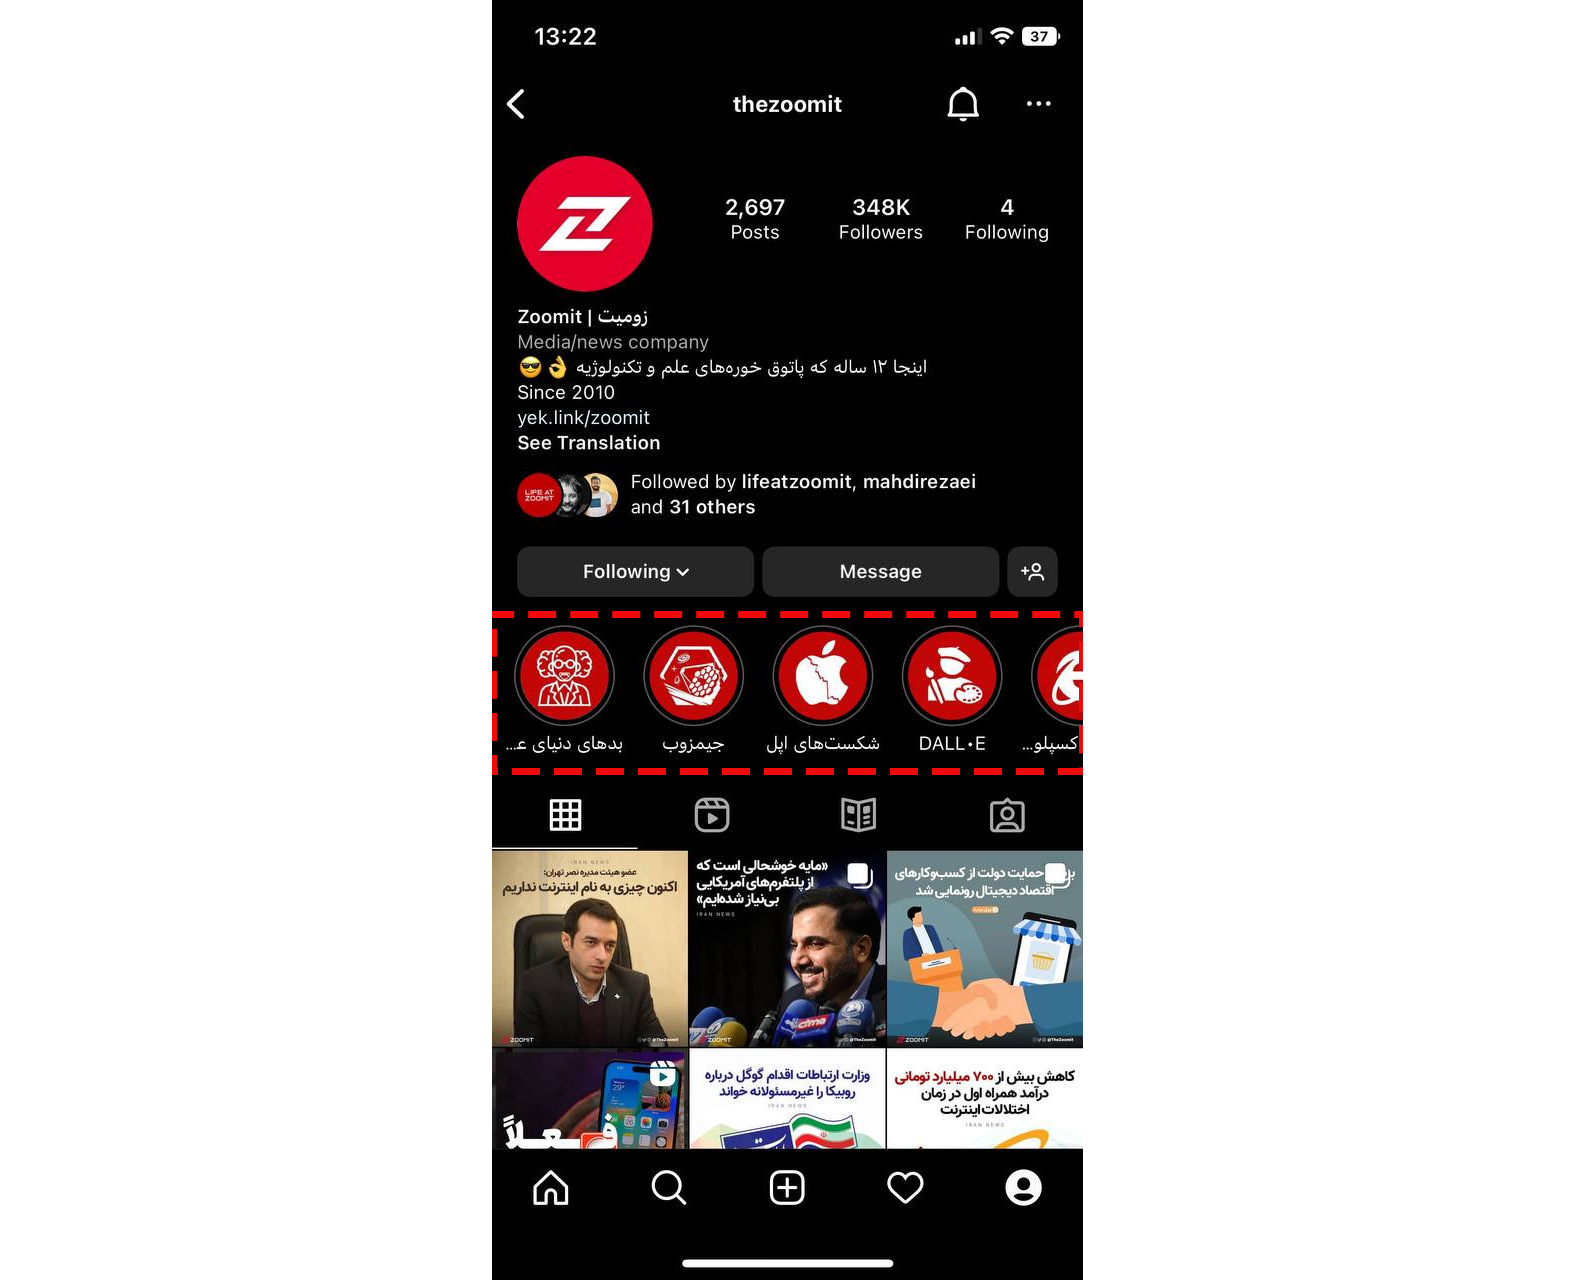 Zoomit's Instagram page highlights